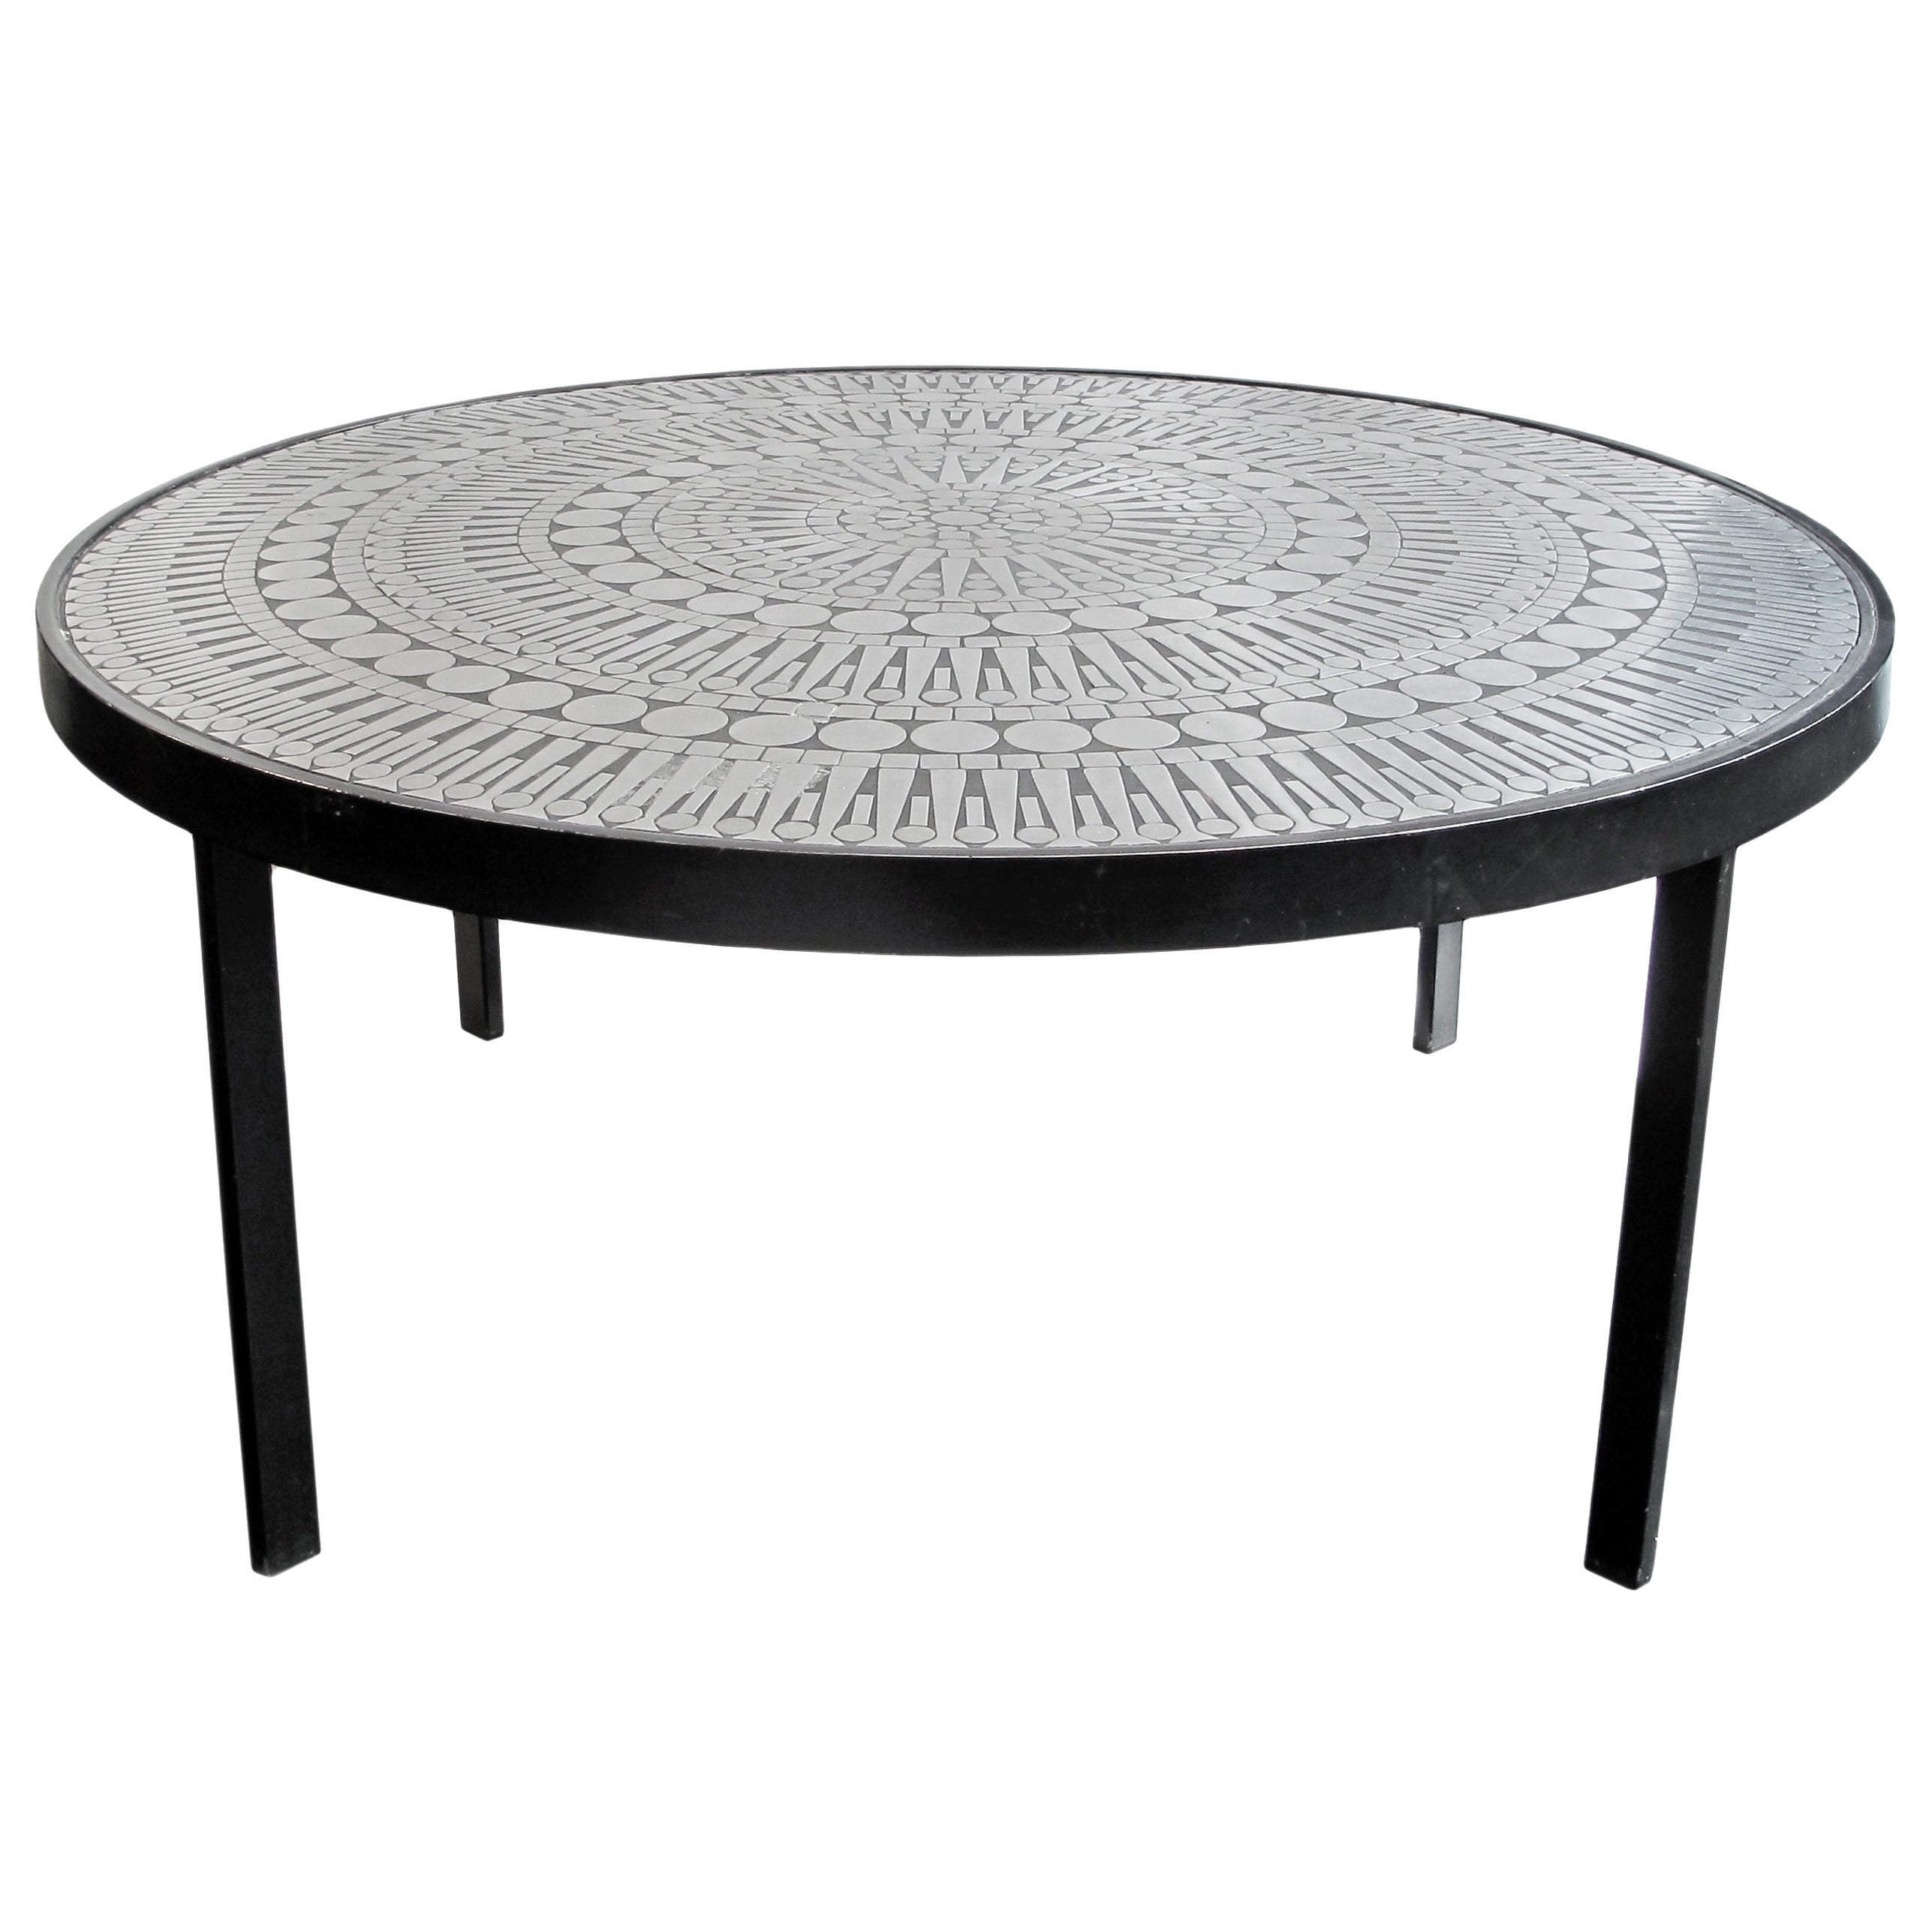 1960s Round Coffee Table with Embossed Graphic Top by Raf Verjans